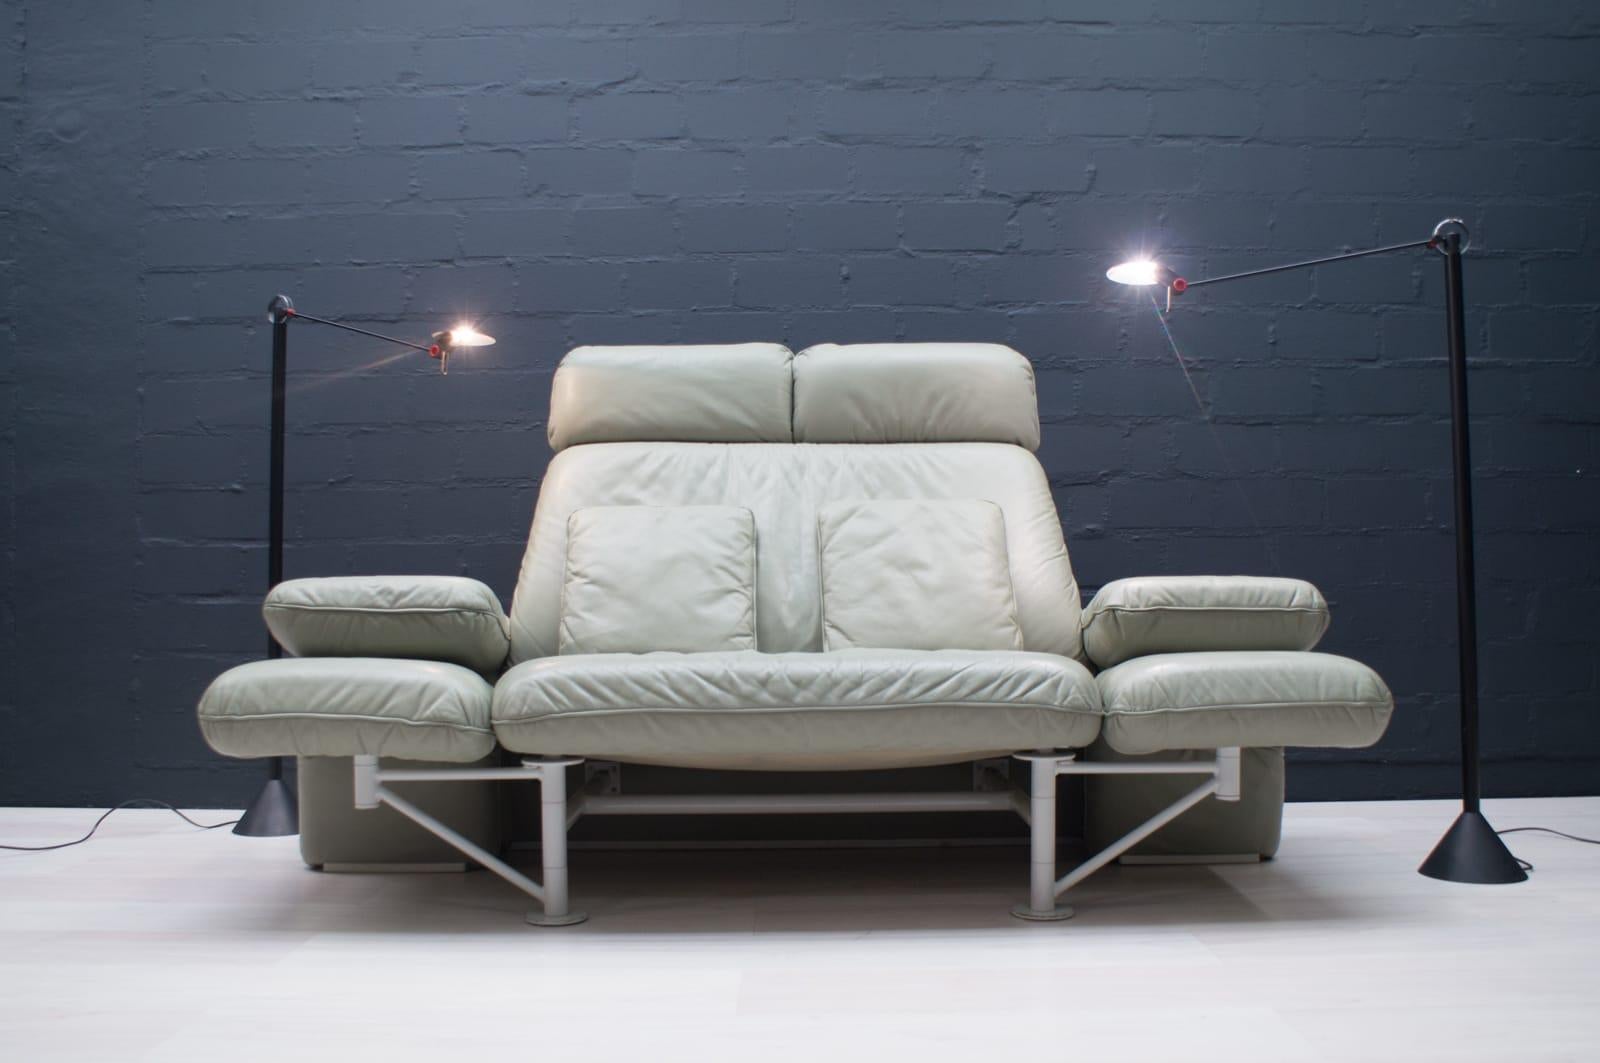 What more can you say to this wonderful sofa? 

Adjustable 